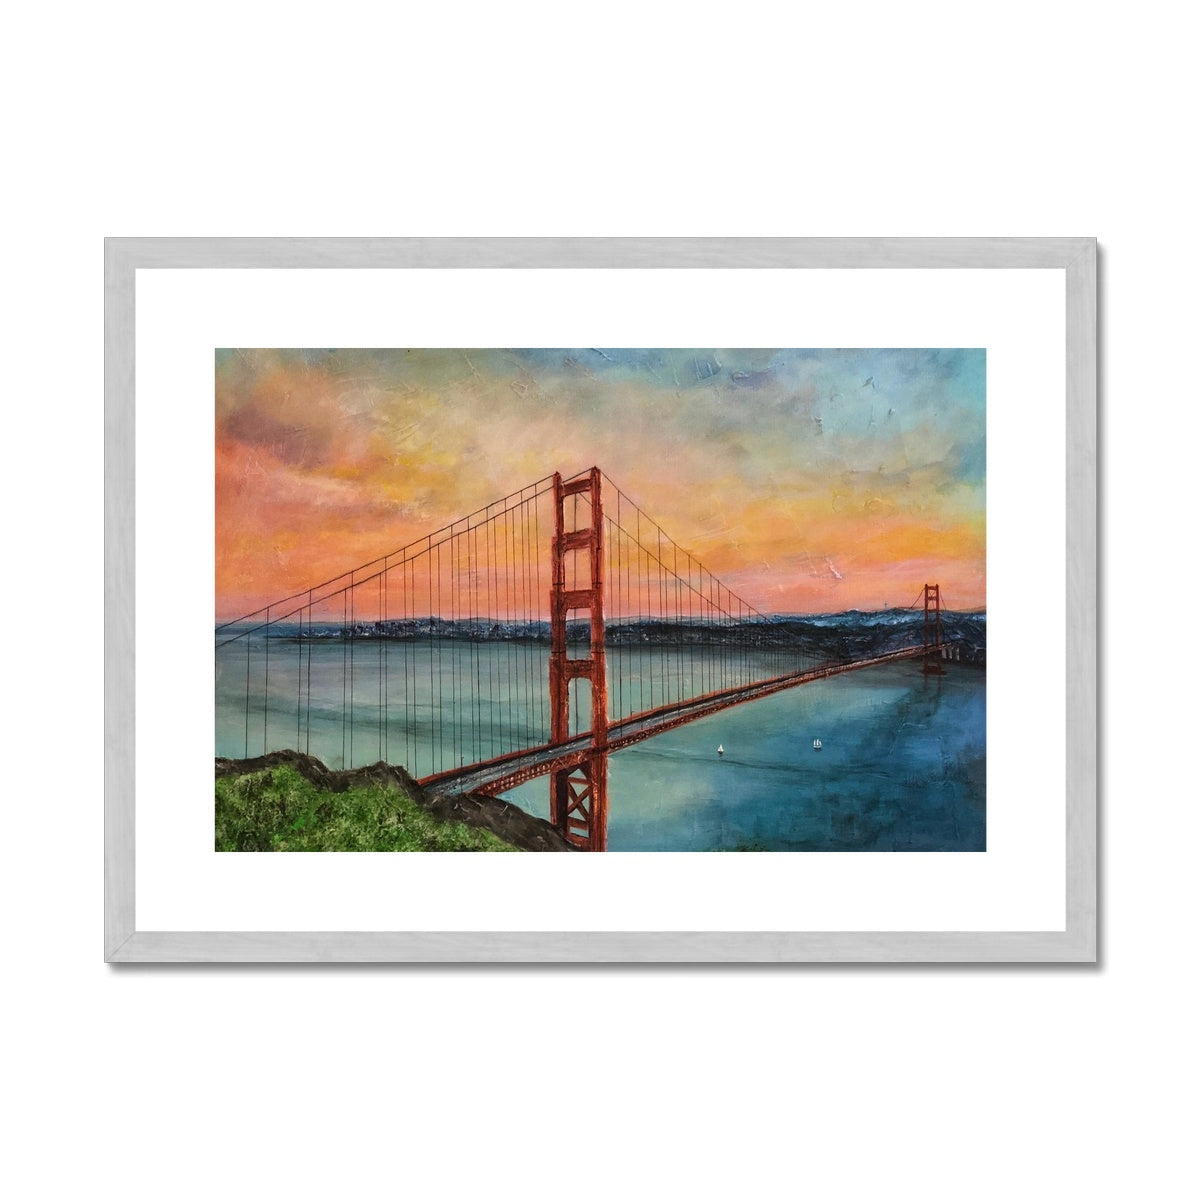 The Golden Gate Bridge Painting | Antique Framed & Mounted Prints From Scotland-Antique Framed & Mounted Prints-World Art Gallery-A2 Landscape-Silver Frame-Paintings, Prints, Homeware, Art Gifts From Scotland By Scottish Artist Kevin Hunter